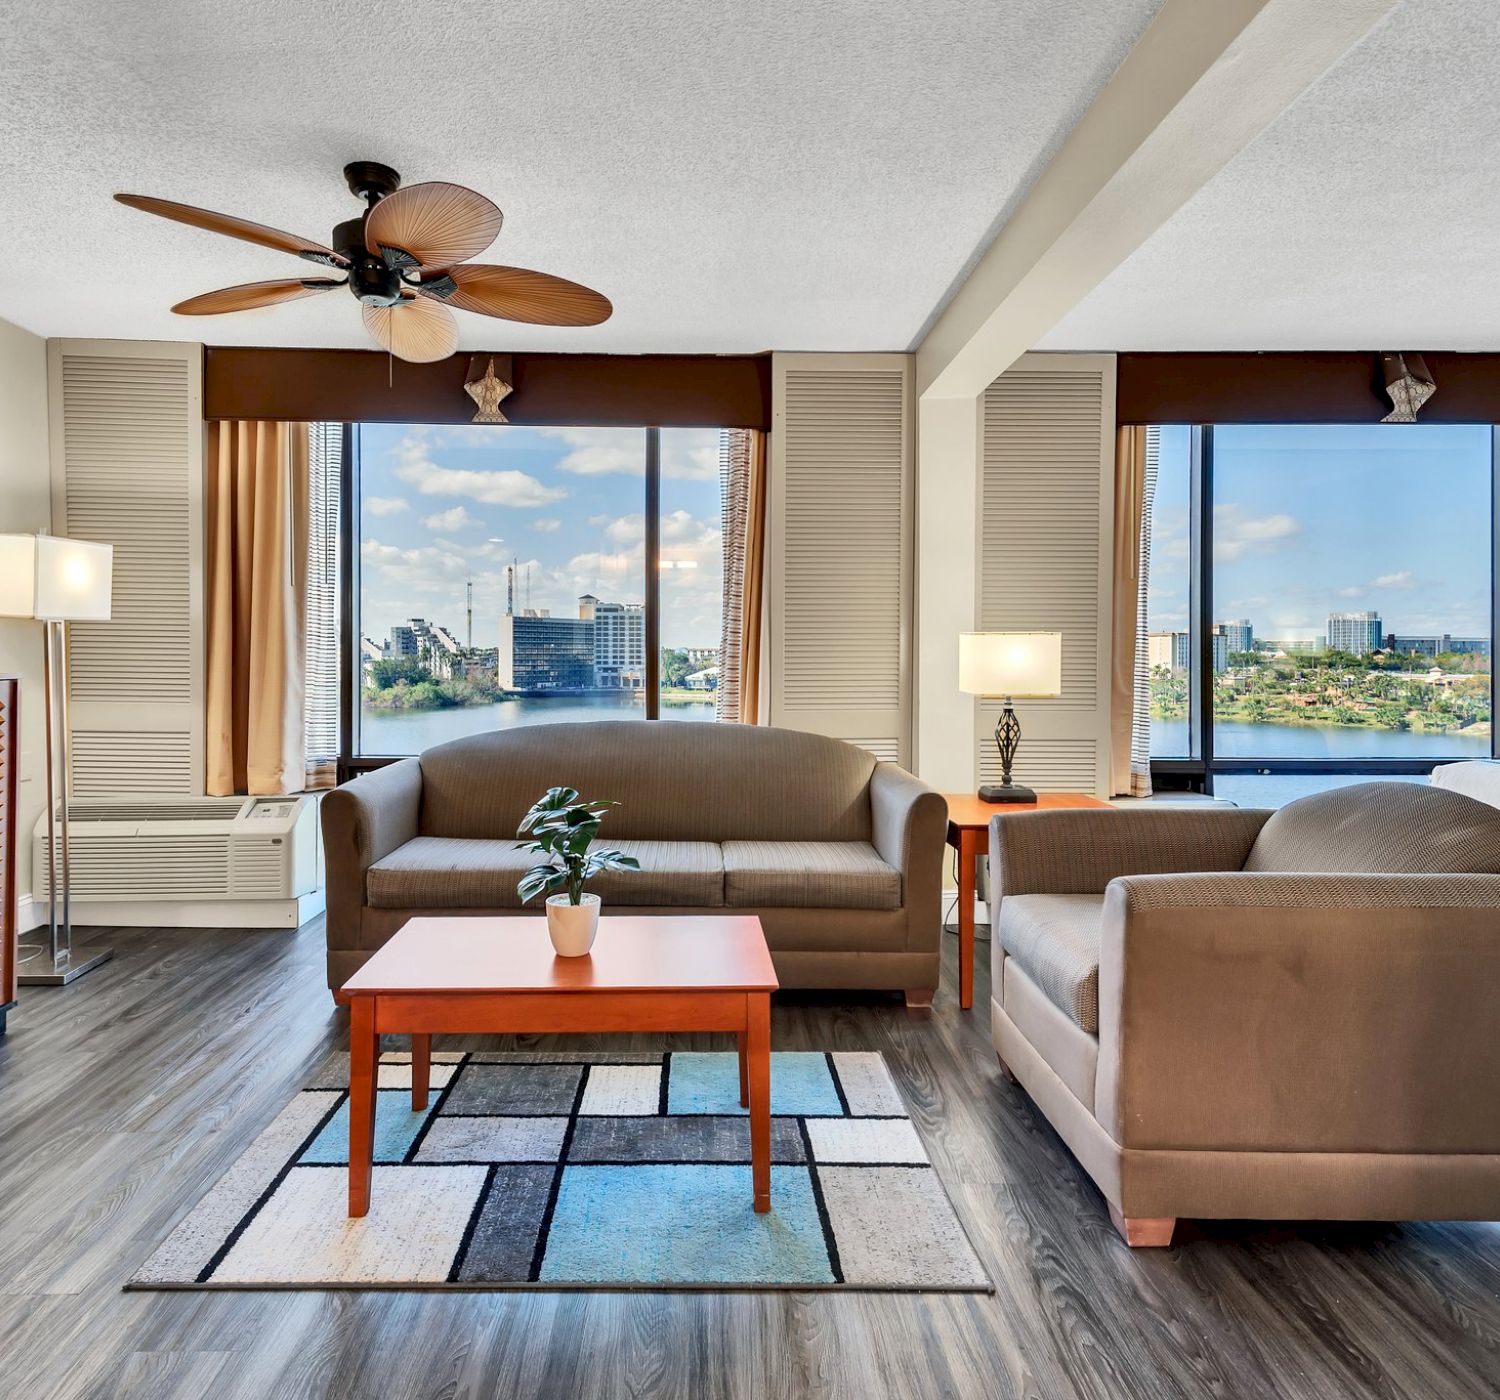 A modern living room with a ceiling fan, a sofa, an armchair, a coffee table, a TV, and large windows showcasing a cityscape view ends the sentence.